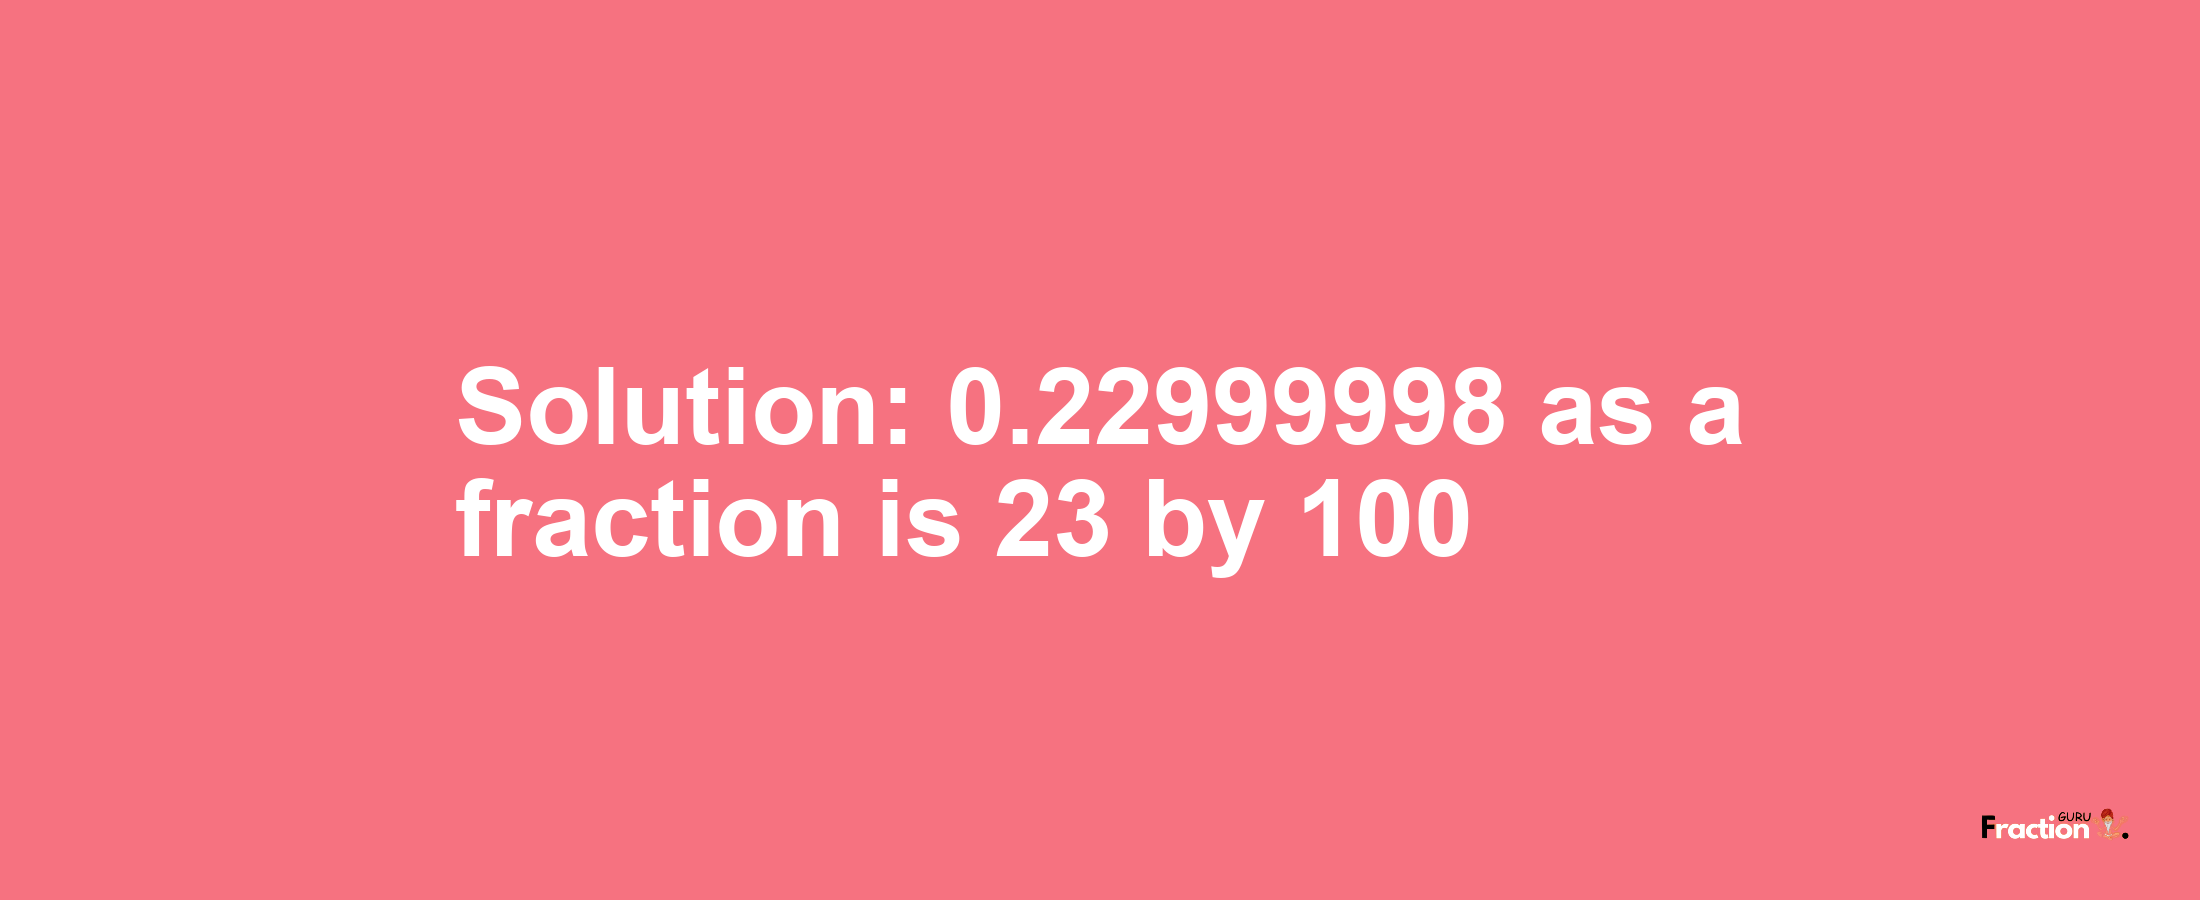 Solution:0.22999998 as a fraction is 23/100